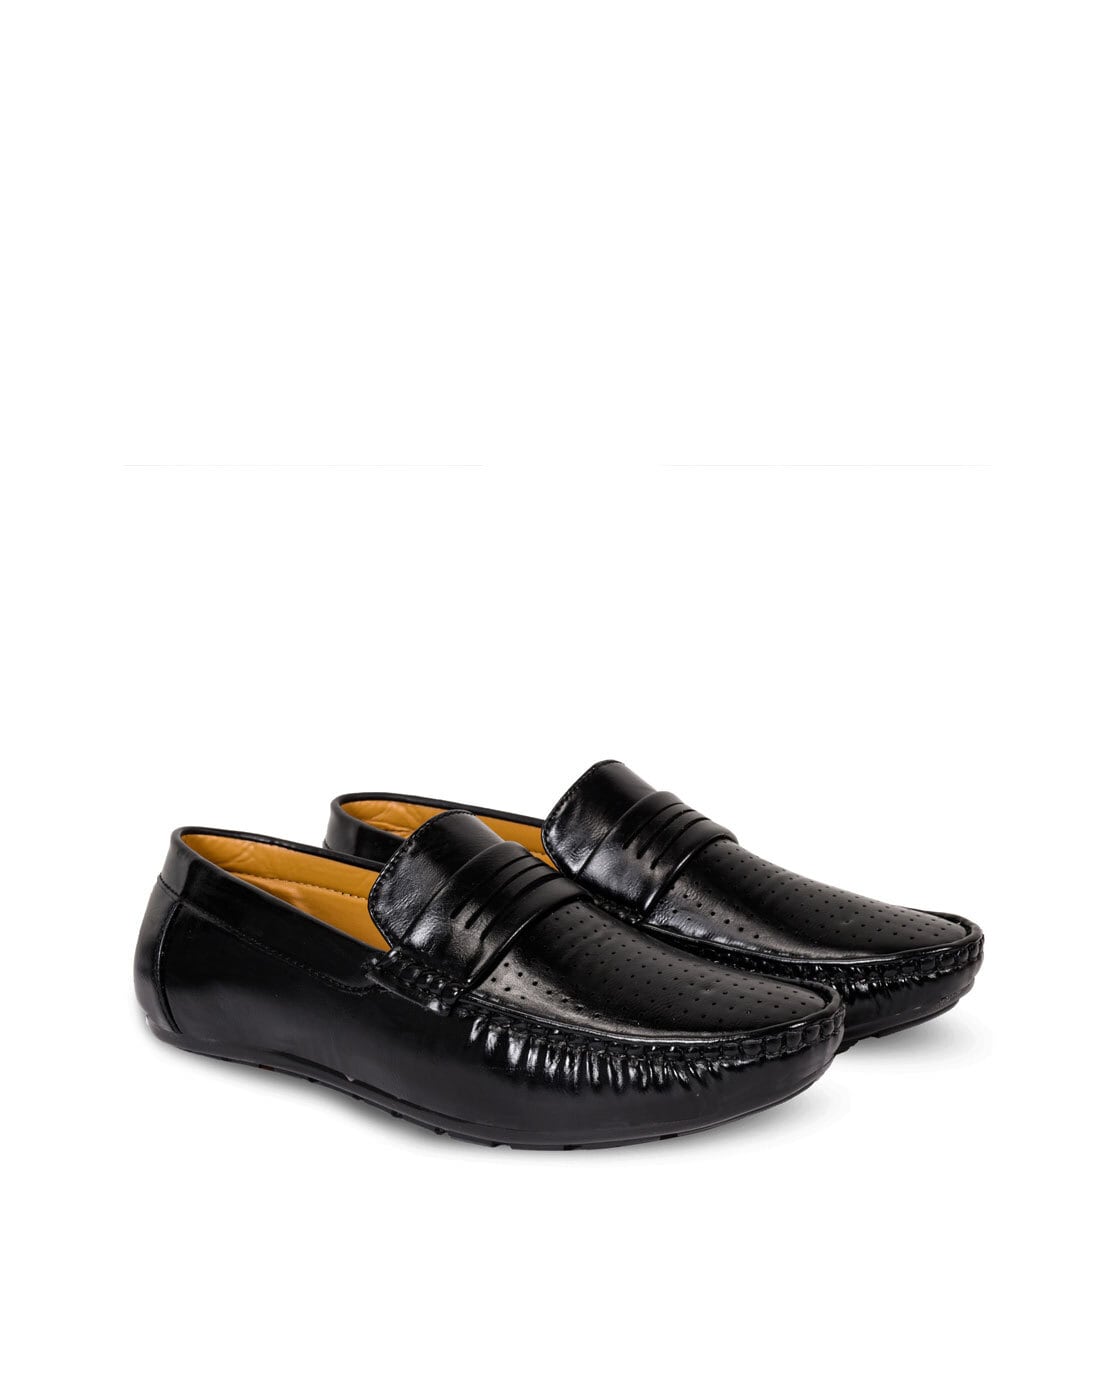 Shuan synthetic leather loafer shoes for men